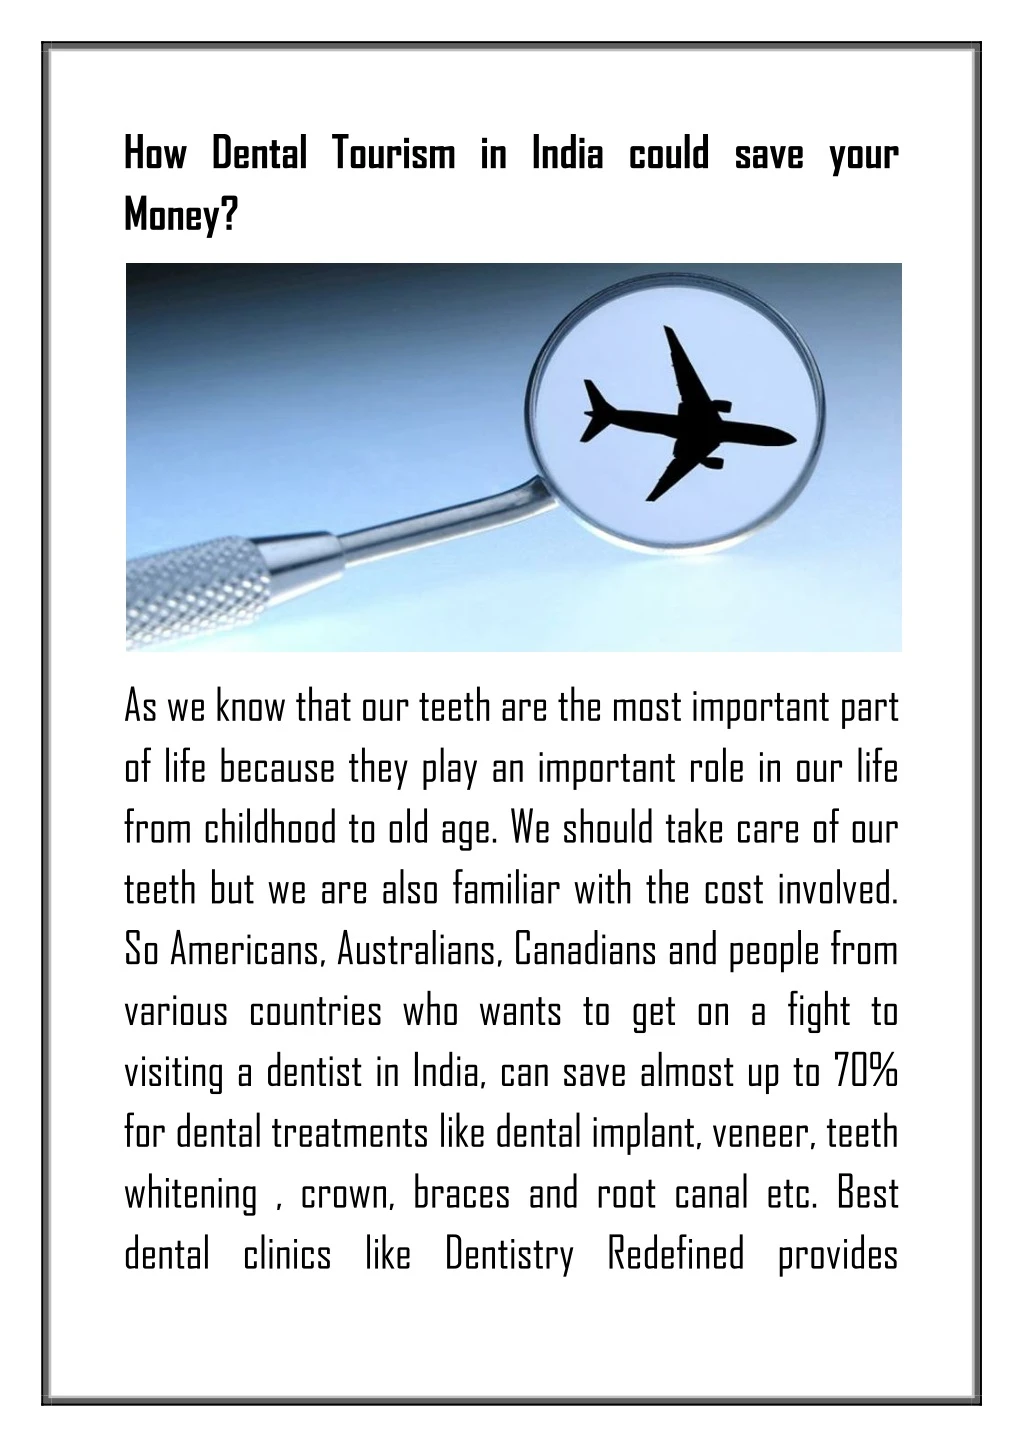 how dental tourism in india could save your money